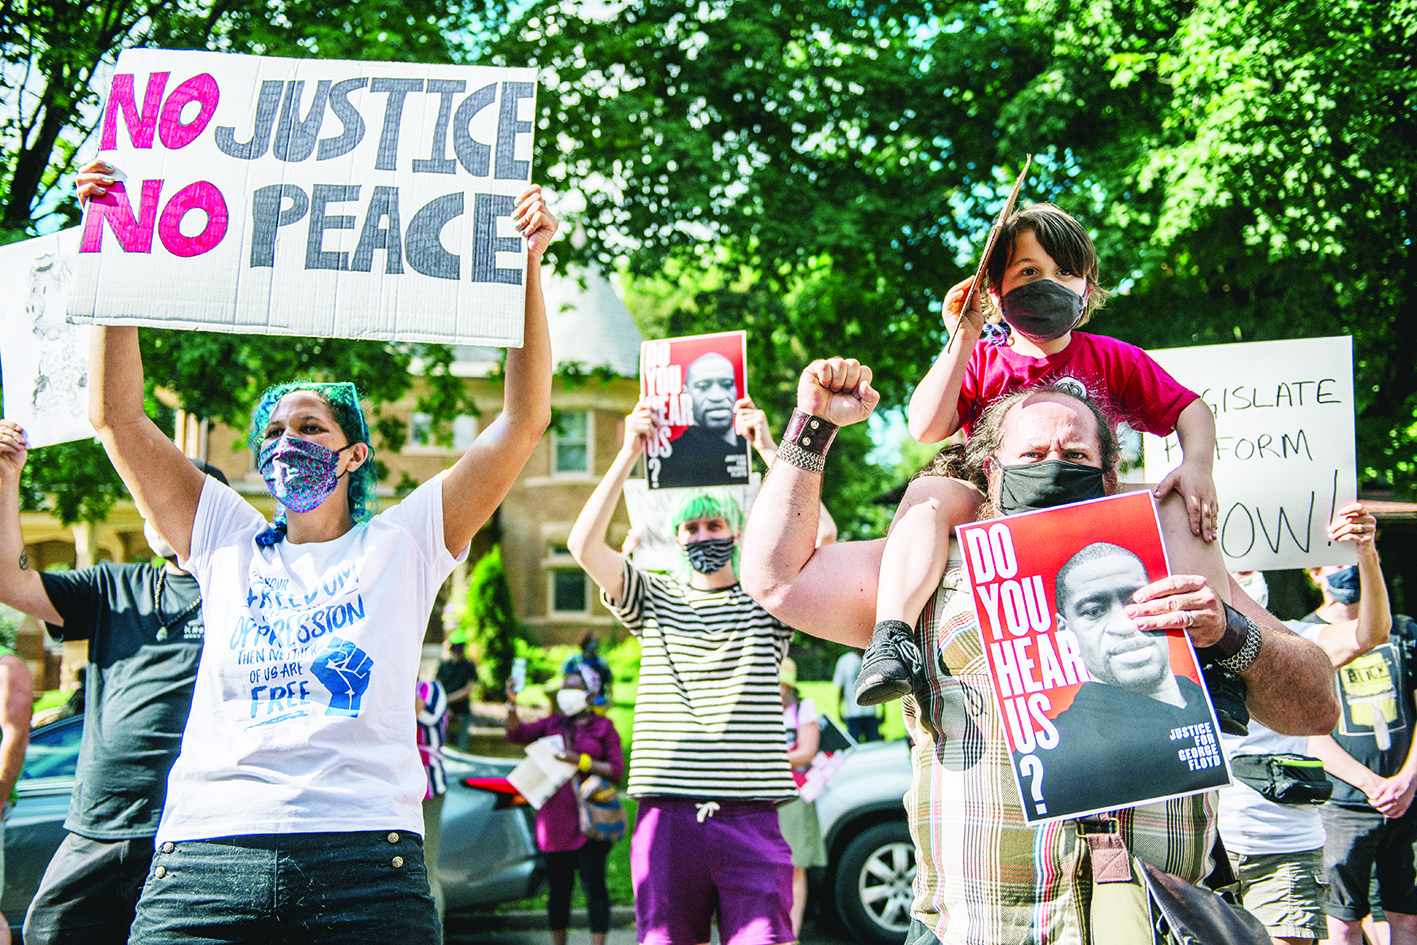 ST. PAUL, MN - JUNE 24: People chant during a demonstration on June 24, 2020 in St. Paul, Minnesota. Protestors gathered outside of Governor Tim Walzs mansion to demand a stricter reform of police legislation in the state of Minnesota. The city of St. Paul continues protests and gatherings to honor the death of George Floyd and other Black men and women who have been killed by officers of the Minnesota Police Department.   Brandon Bell/Getty Images/AFP